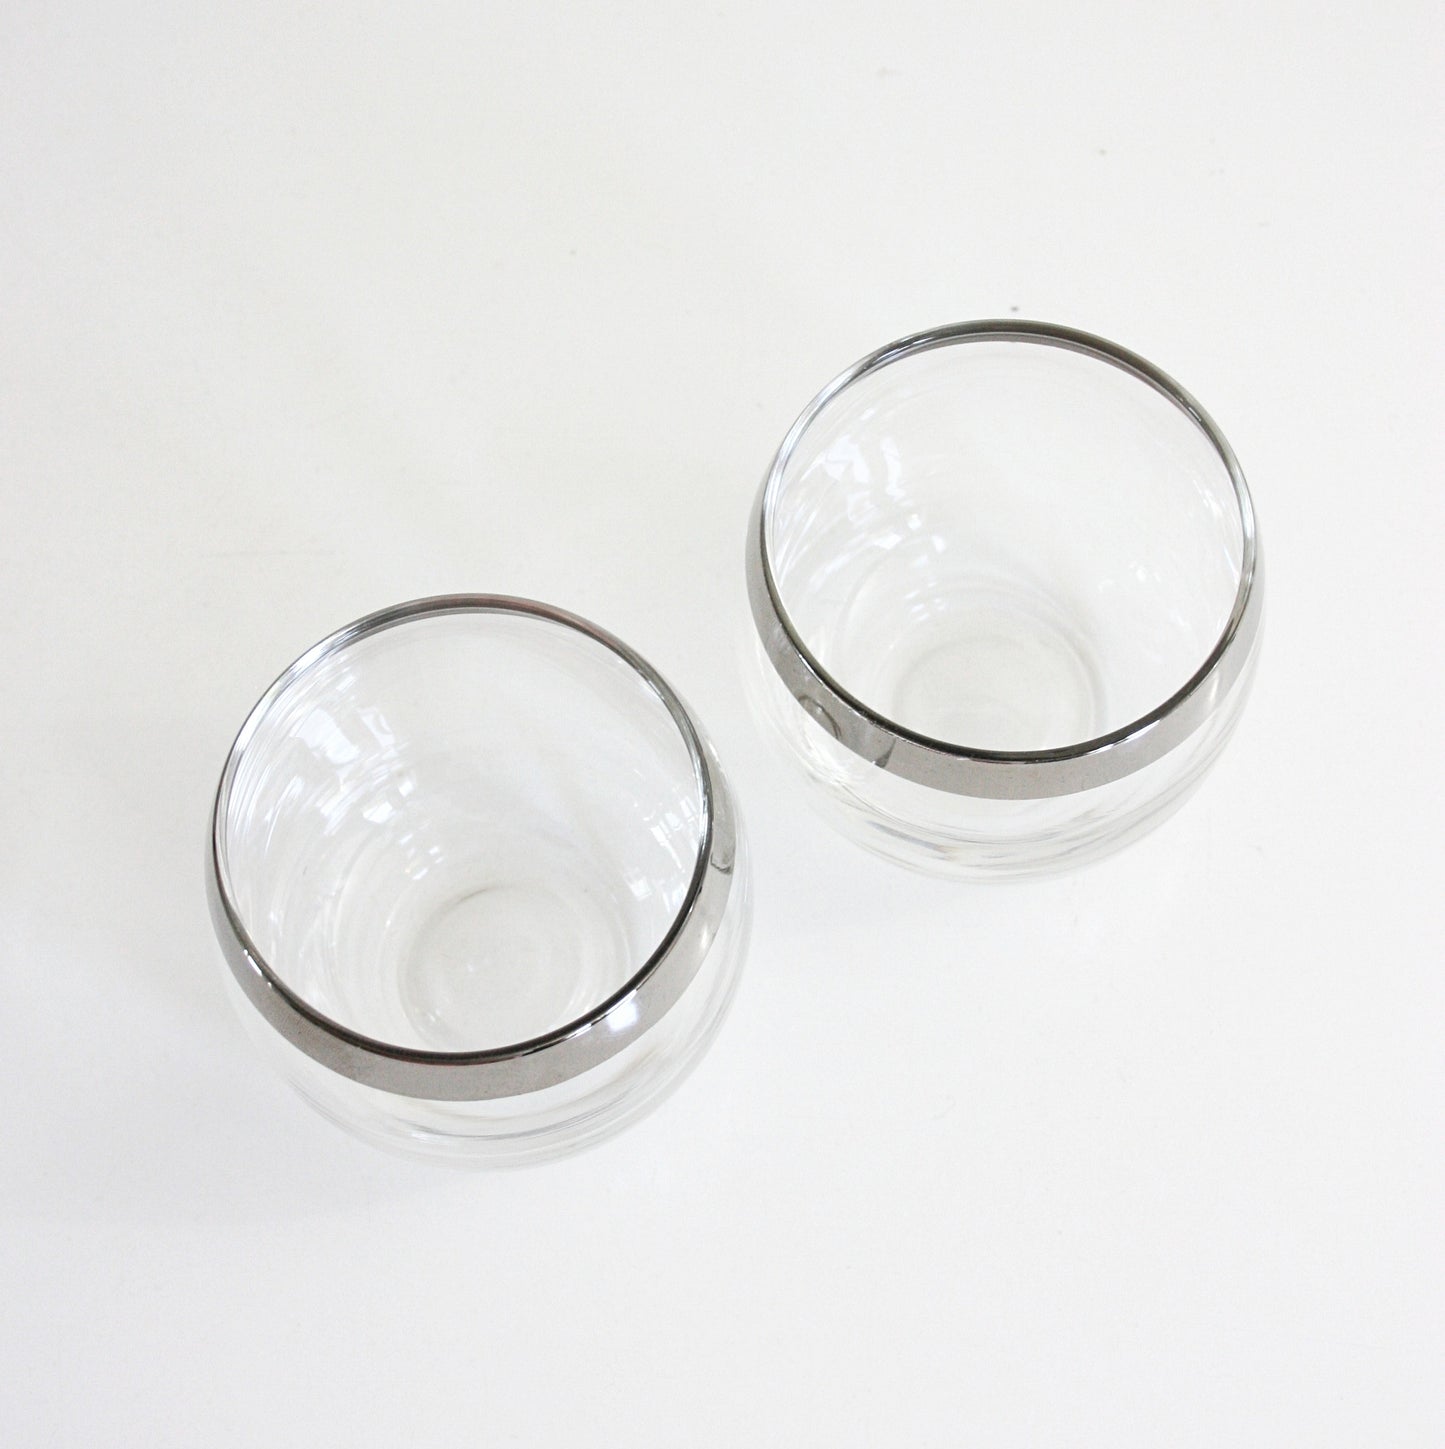 SOLD - Vintage Pair of Dorothy Thorpe Roly Poly Glasses / Mid Century Modern Mad Men Tumblers